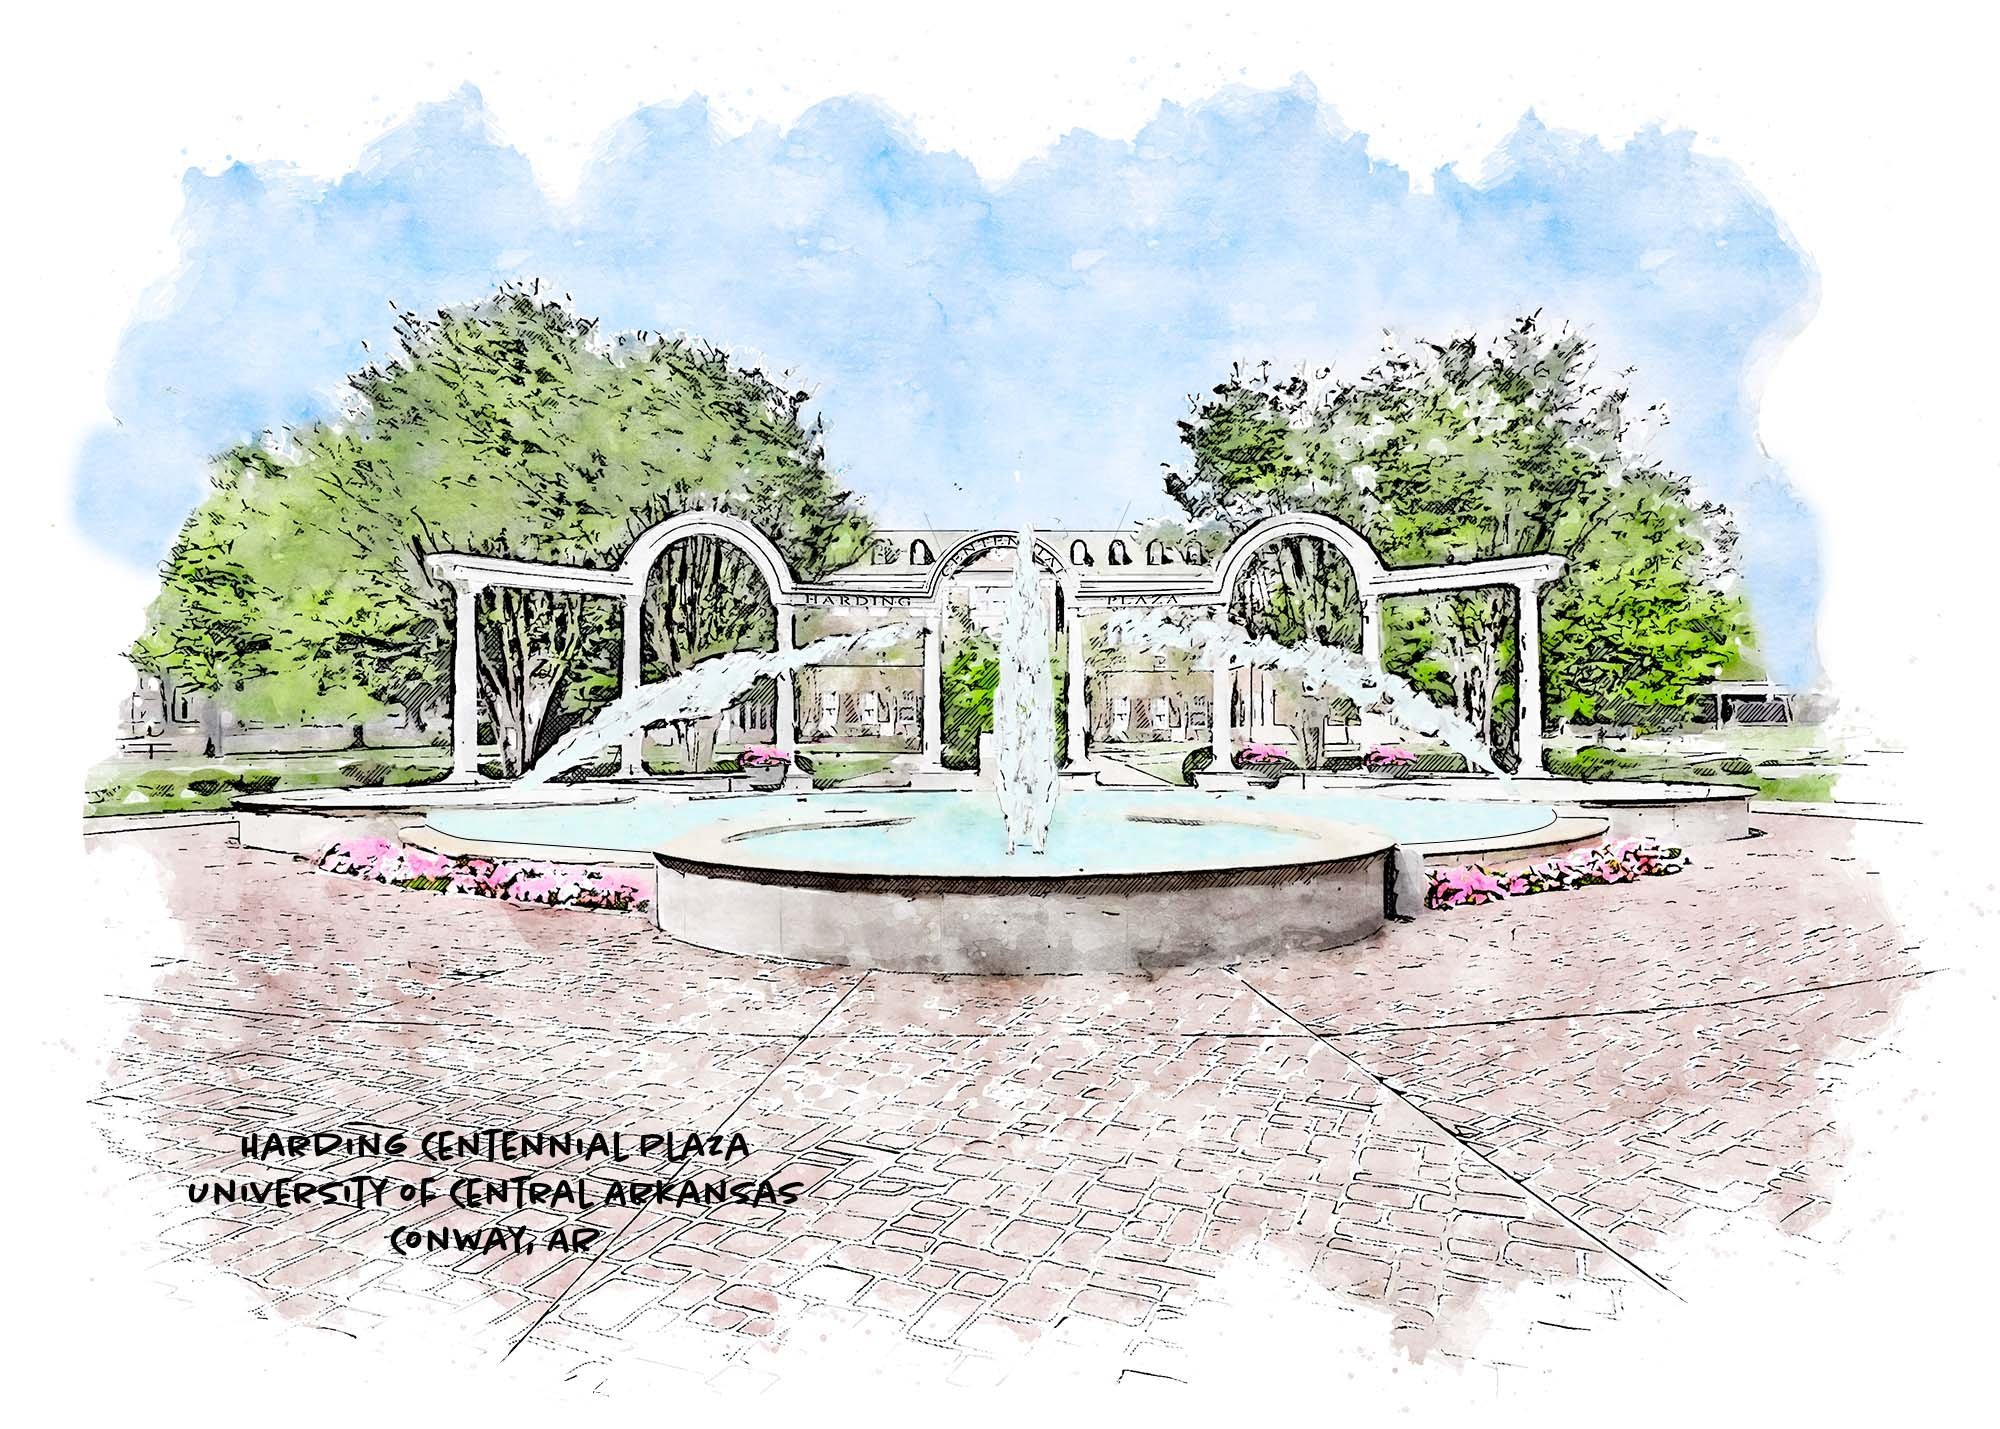 Our newest addition!  Harding Centennial Plaza at the University of Central Arkansas is set along Donaghey Avenue in Conway, Arkansas. Opened in 2005, it is named for UCA alumni Rush and Linda Harding, who gifted $1.2 million to the University.  Univ